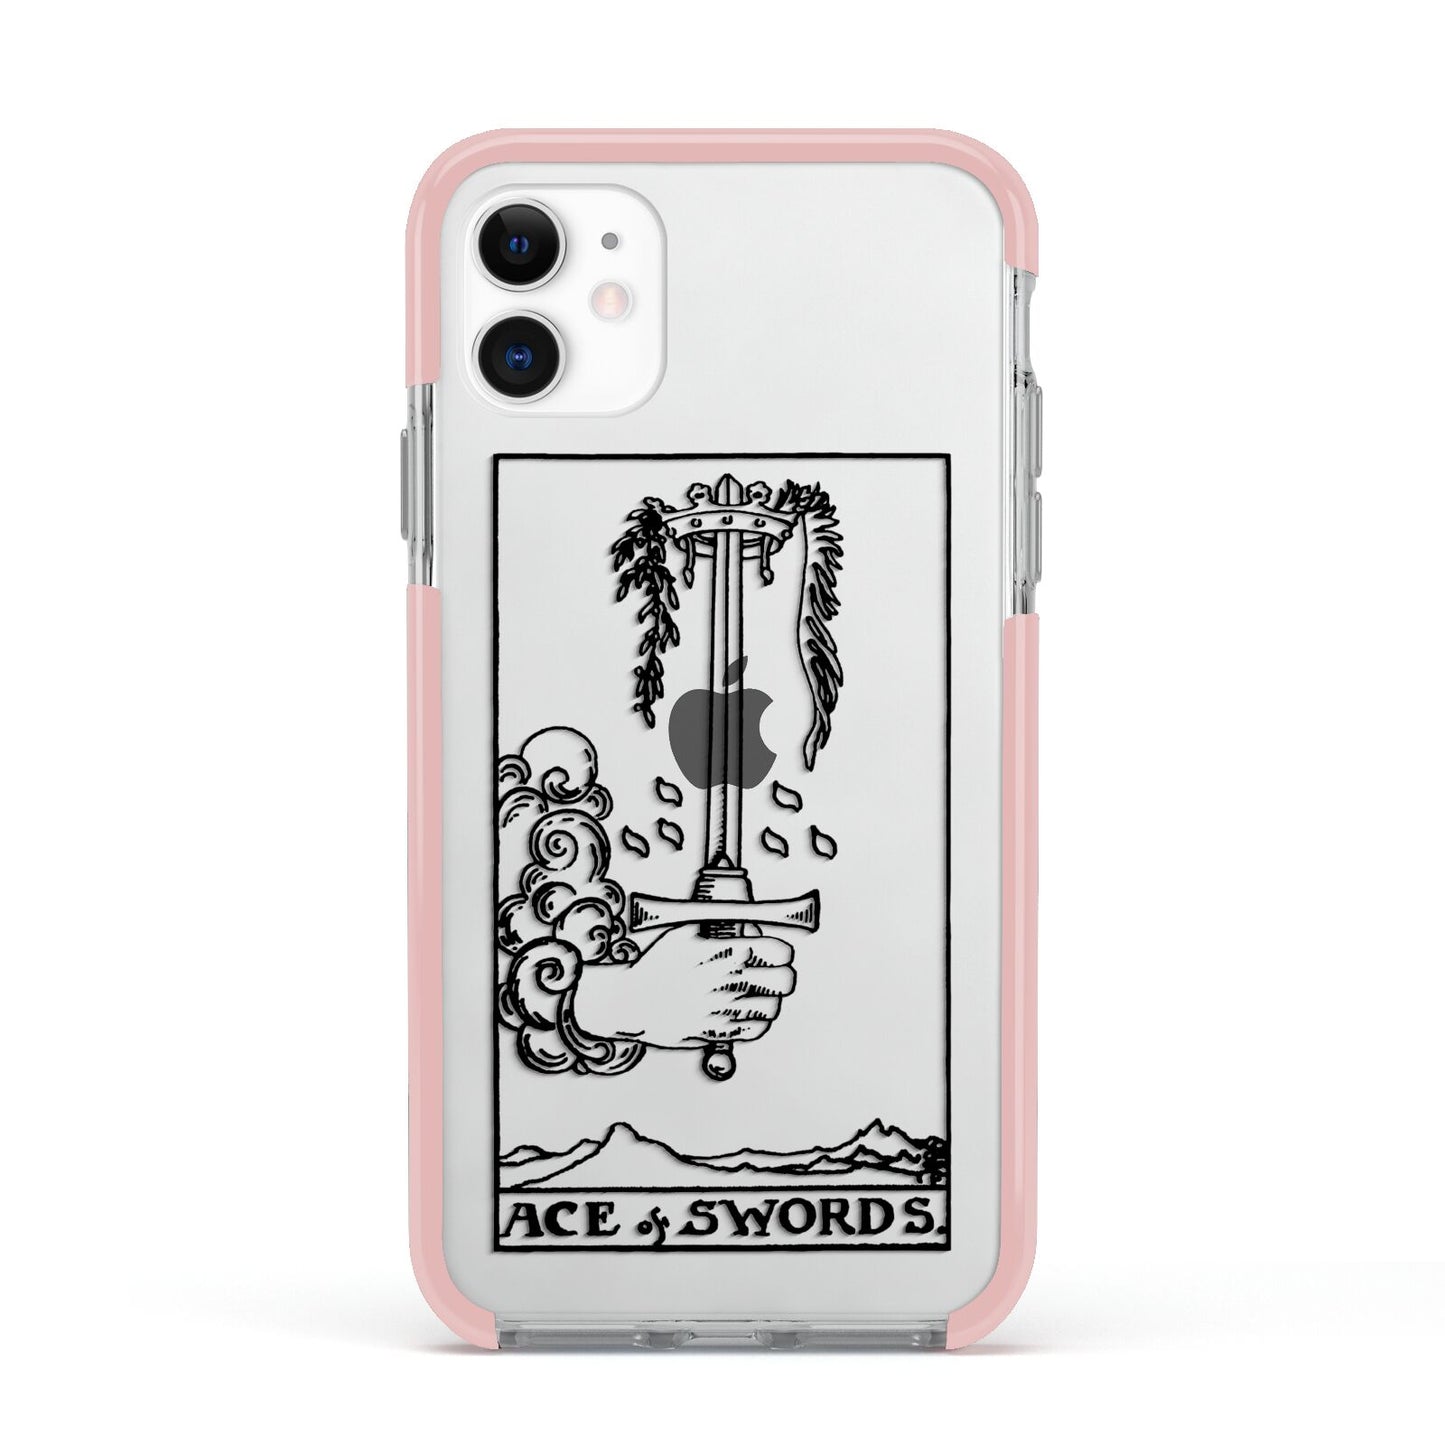 Ace of Swords Monochrome Apple iPhone 11 in White with Pink Impact Case